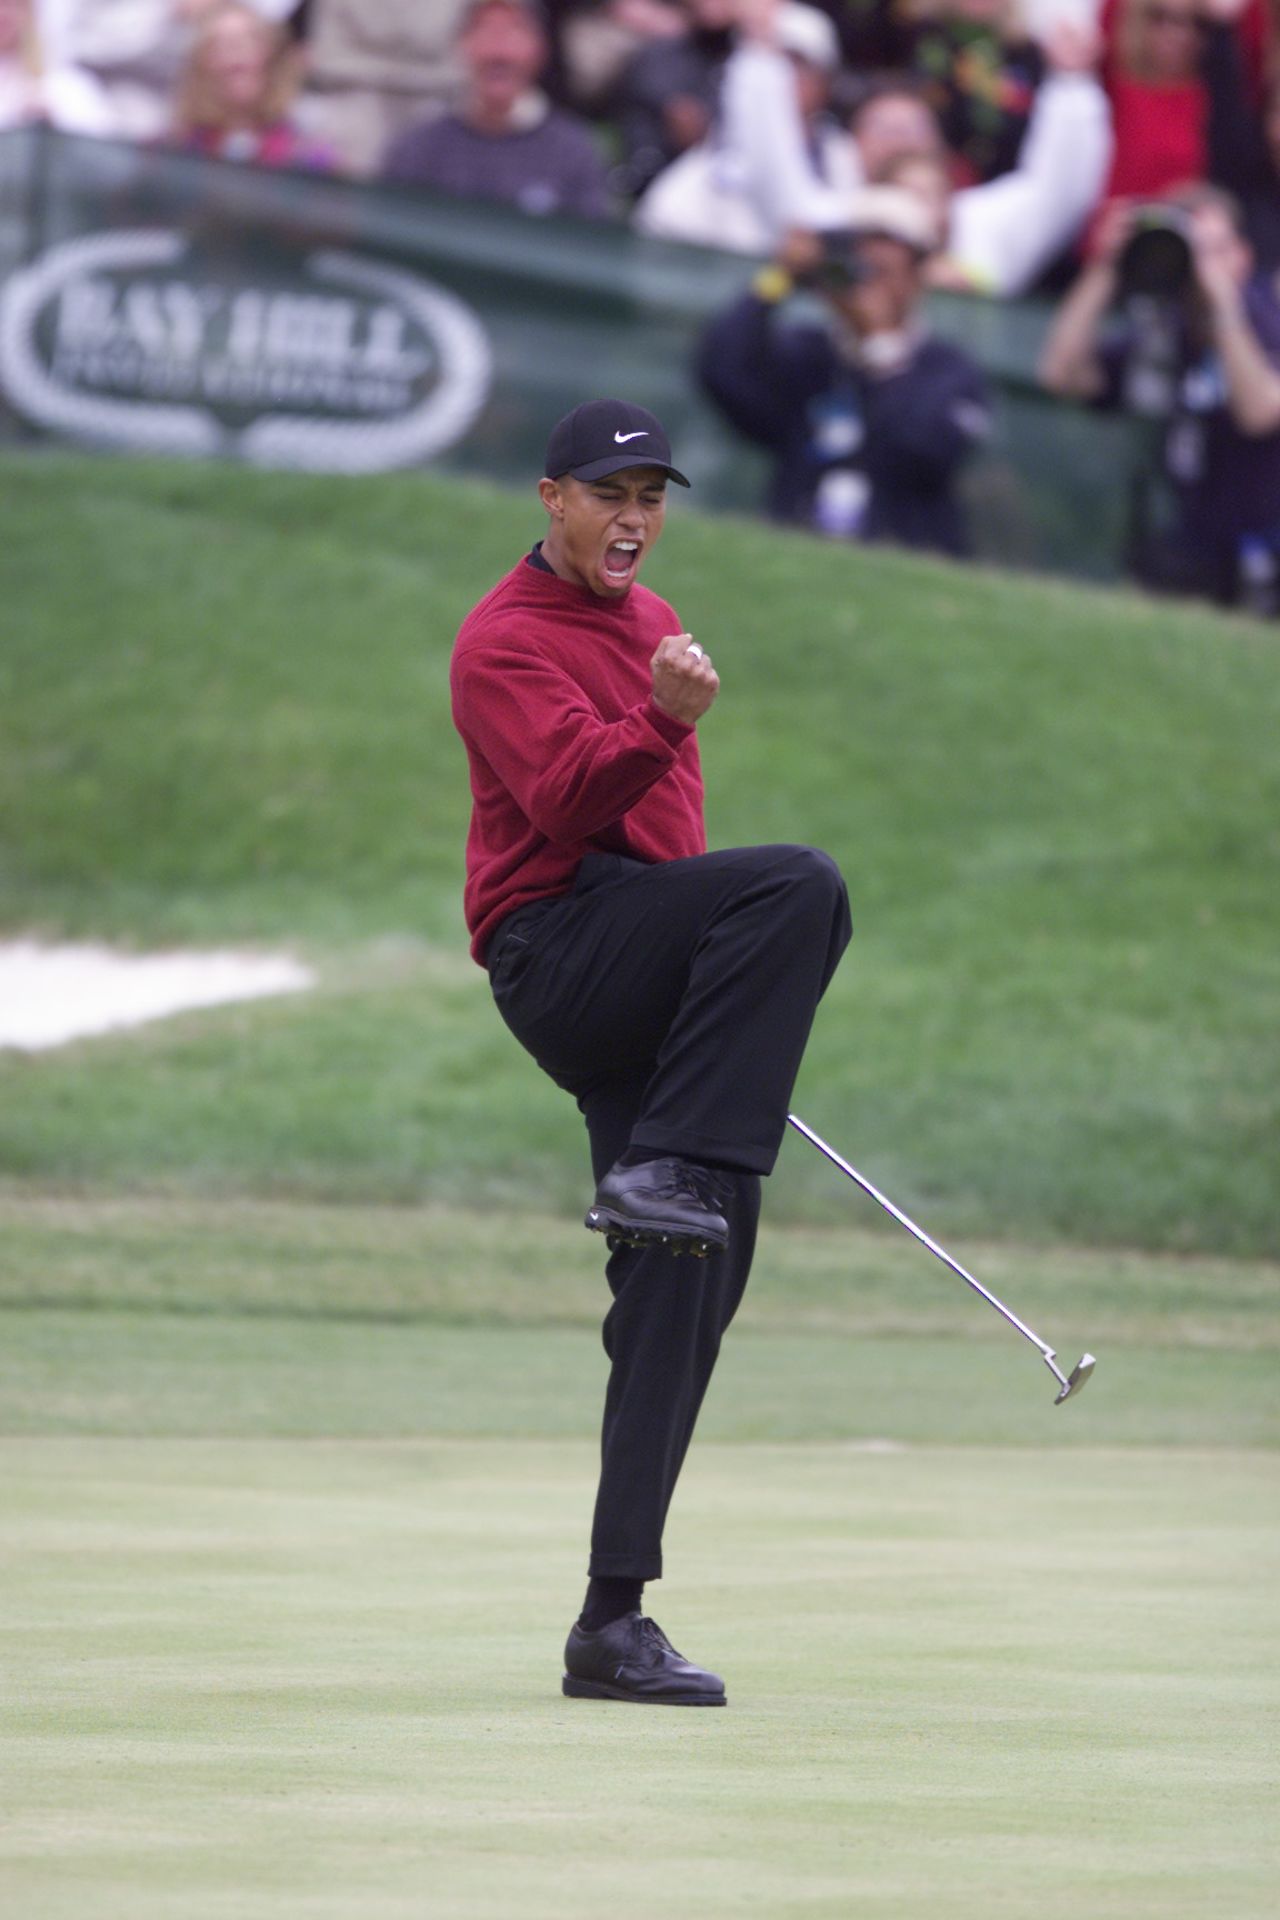 Woods retained his title in 2001, finishing the tournament 18 under par.